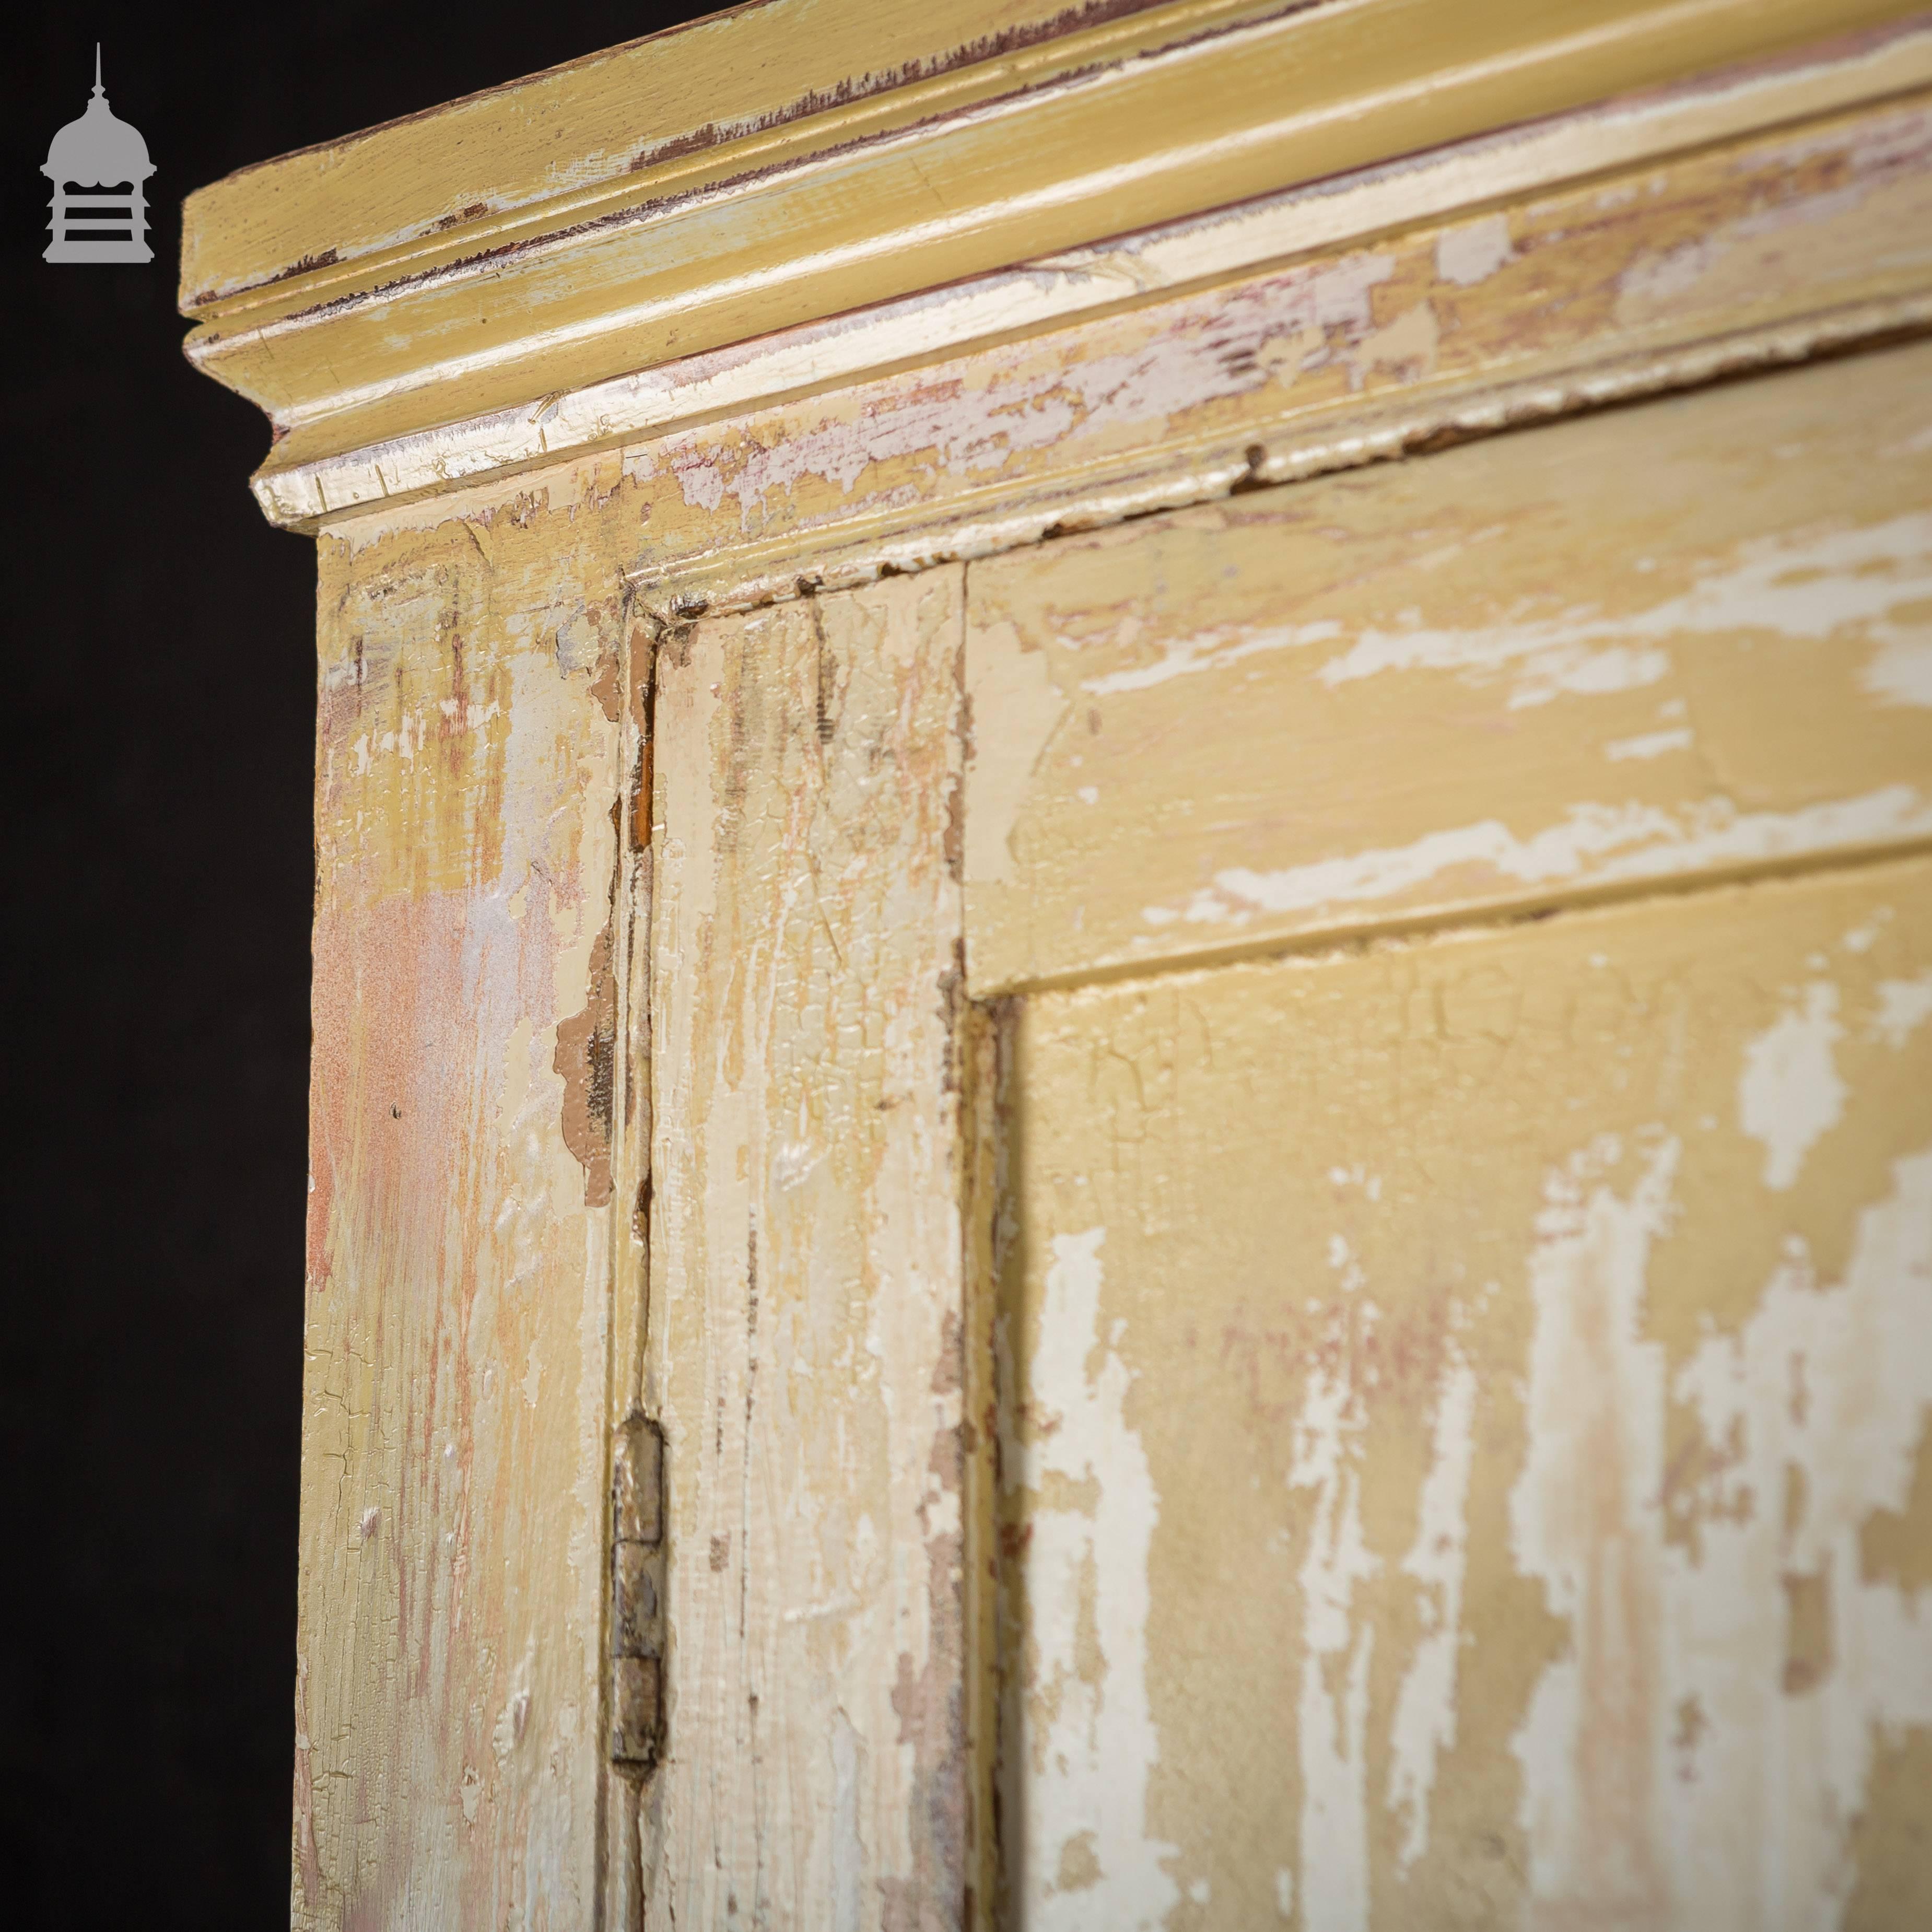 19th century pine pantry kitchen cupboards with distressed paint.